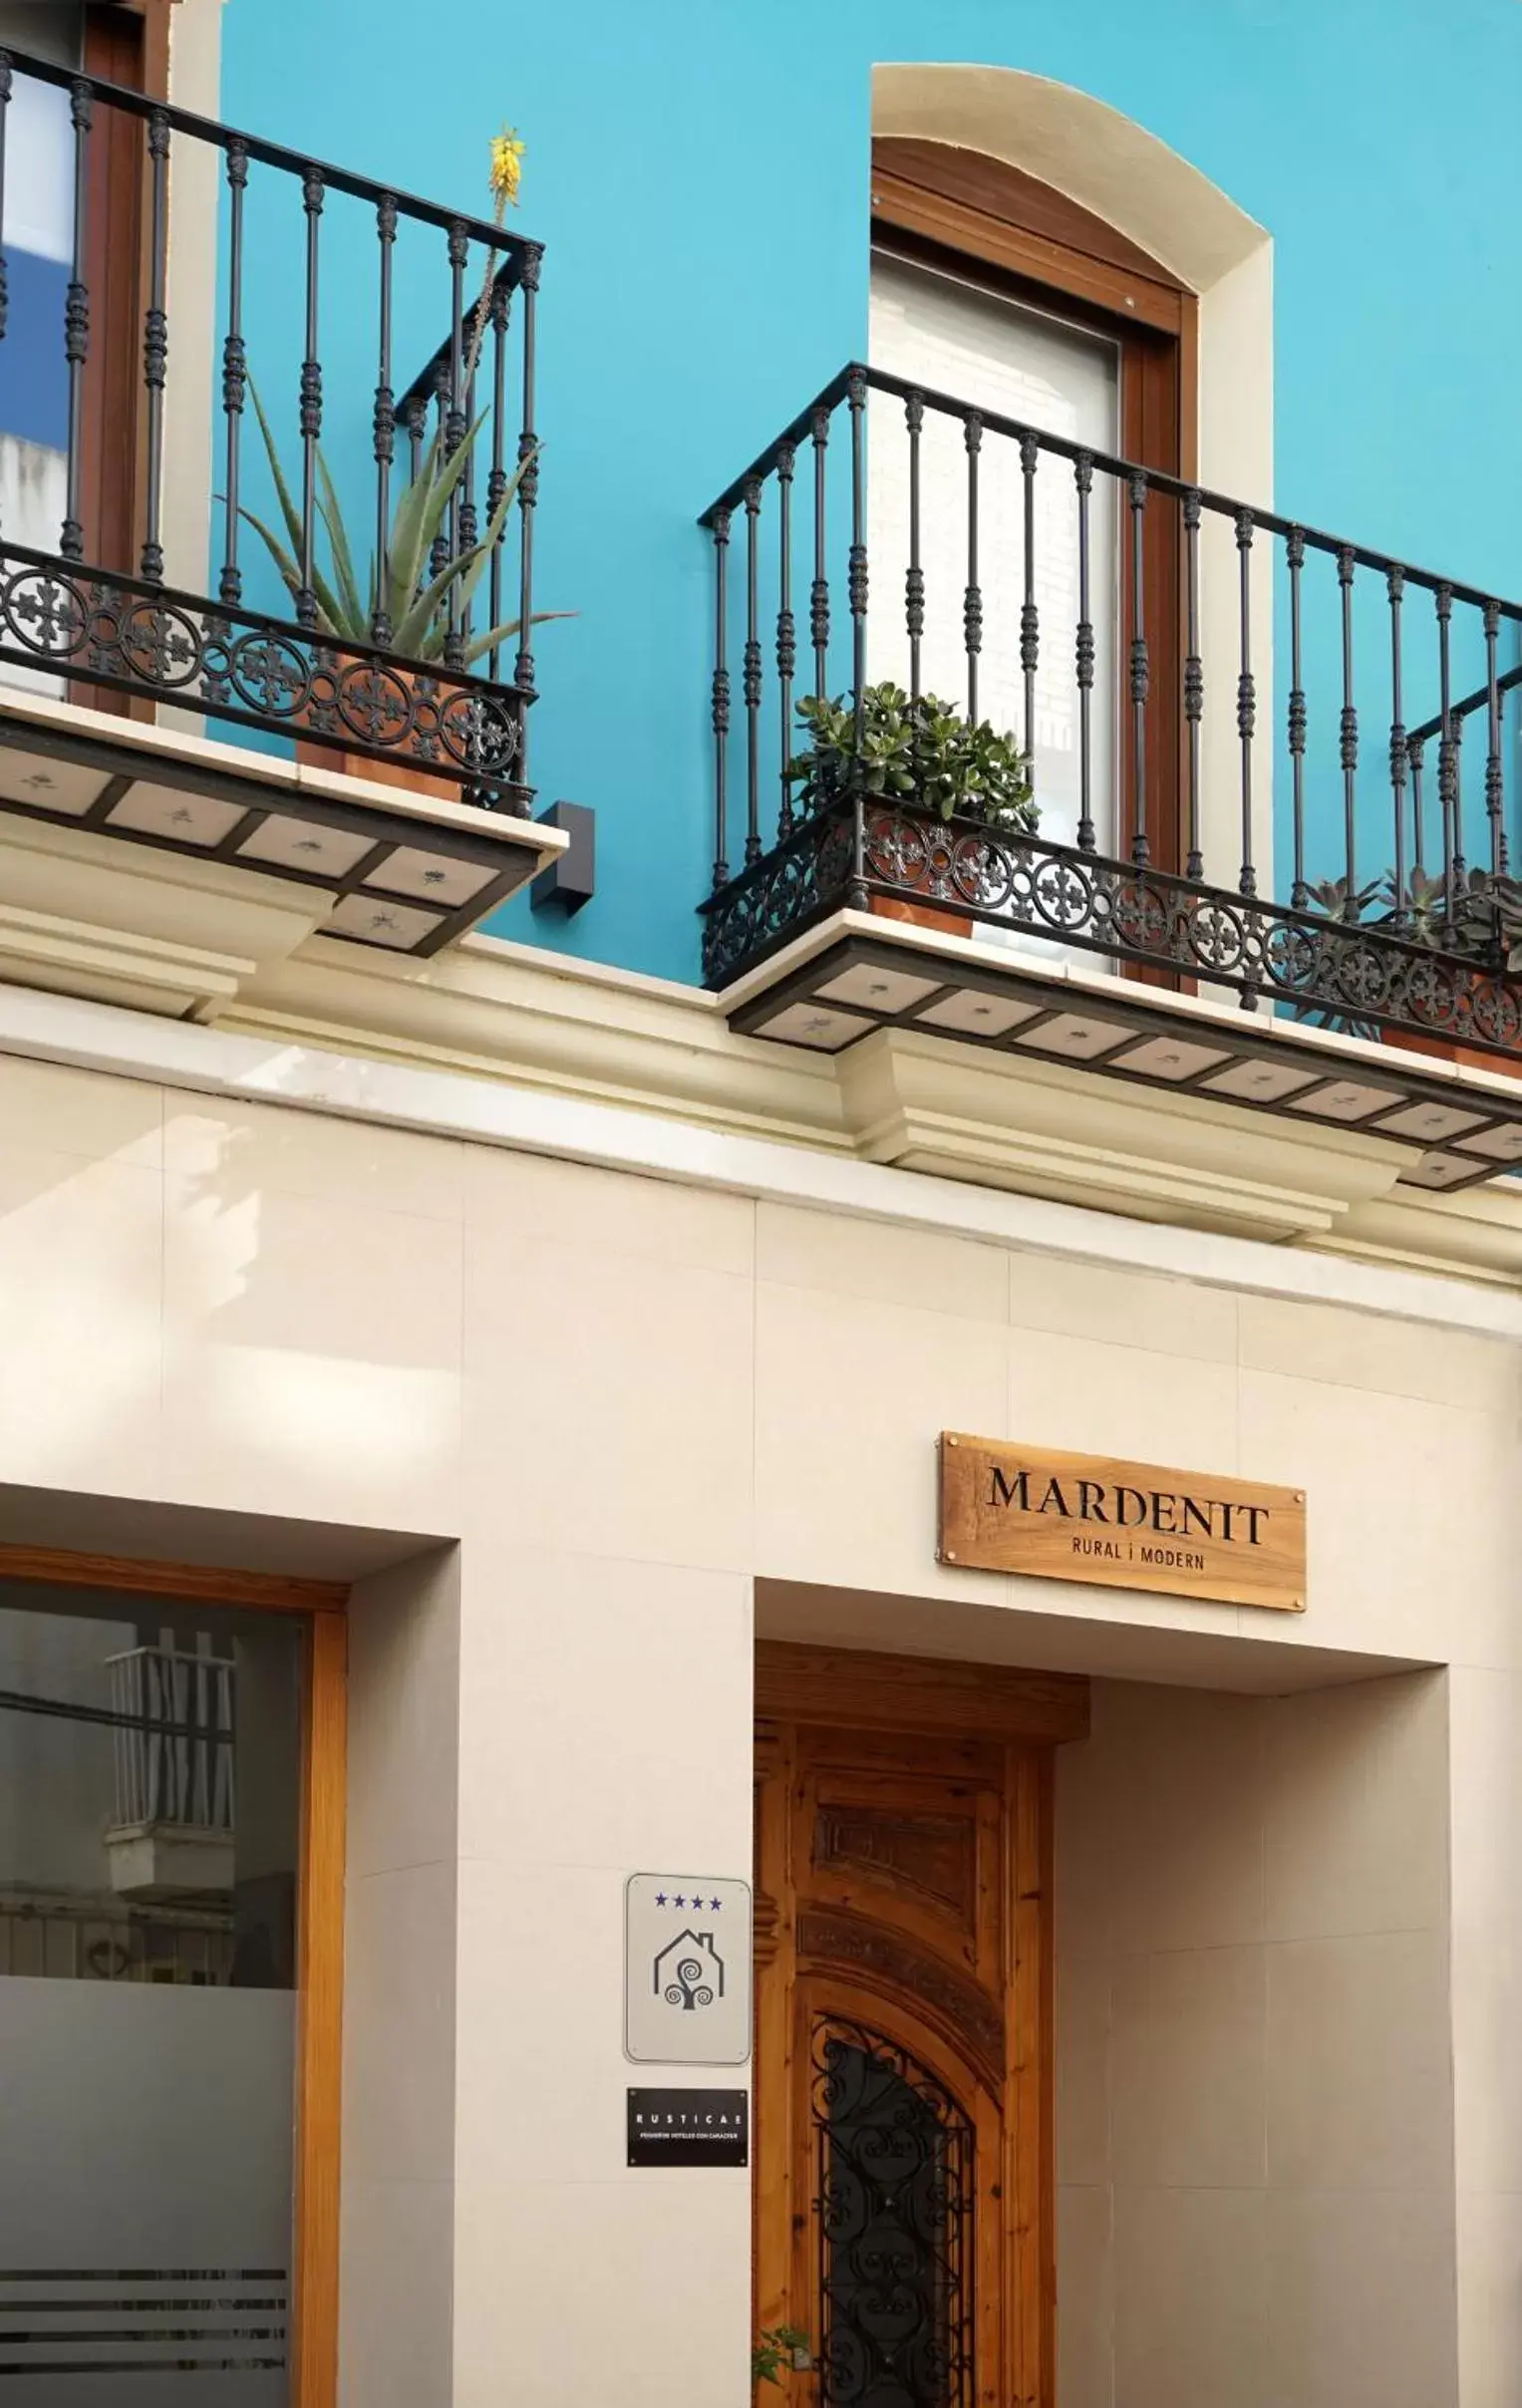 Property Building in Mardenit Hotel Boutique